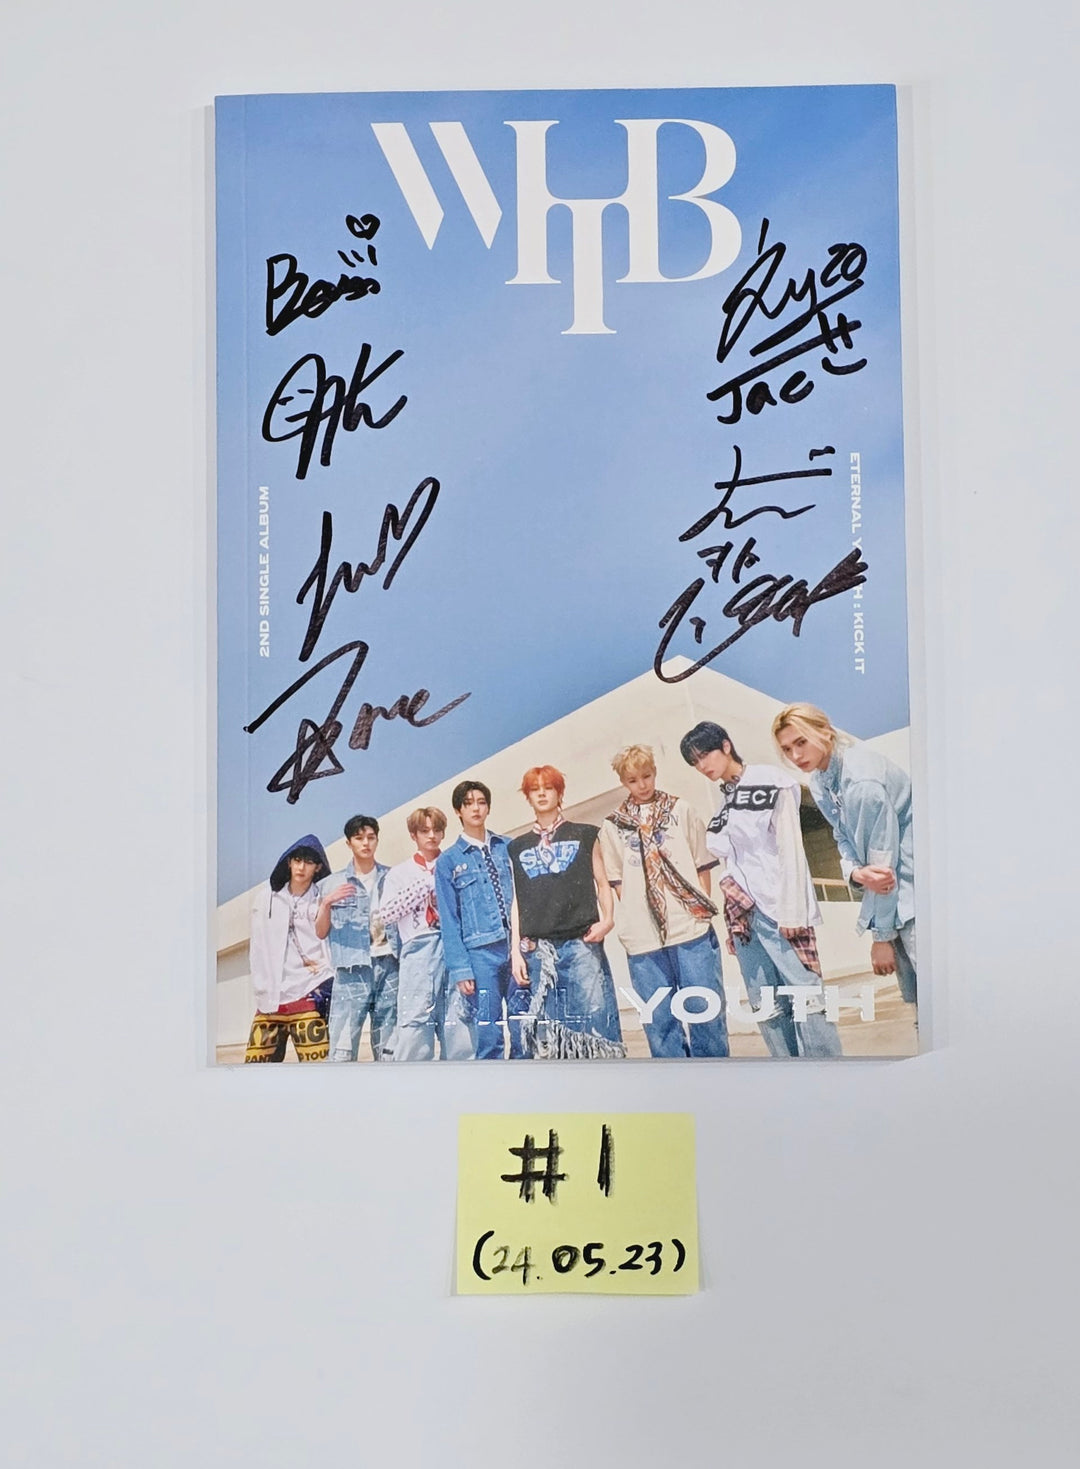 WHIB "ETERNAL YOUTH : KICK IT" - Hand Autographed(Signed) Promo Album [24.5.23]